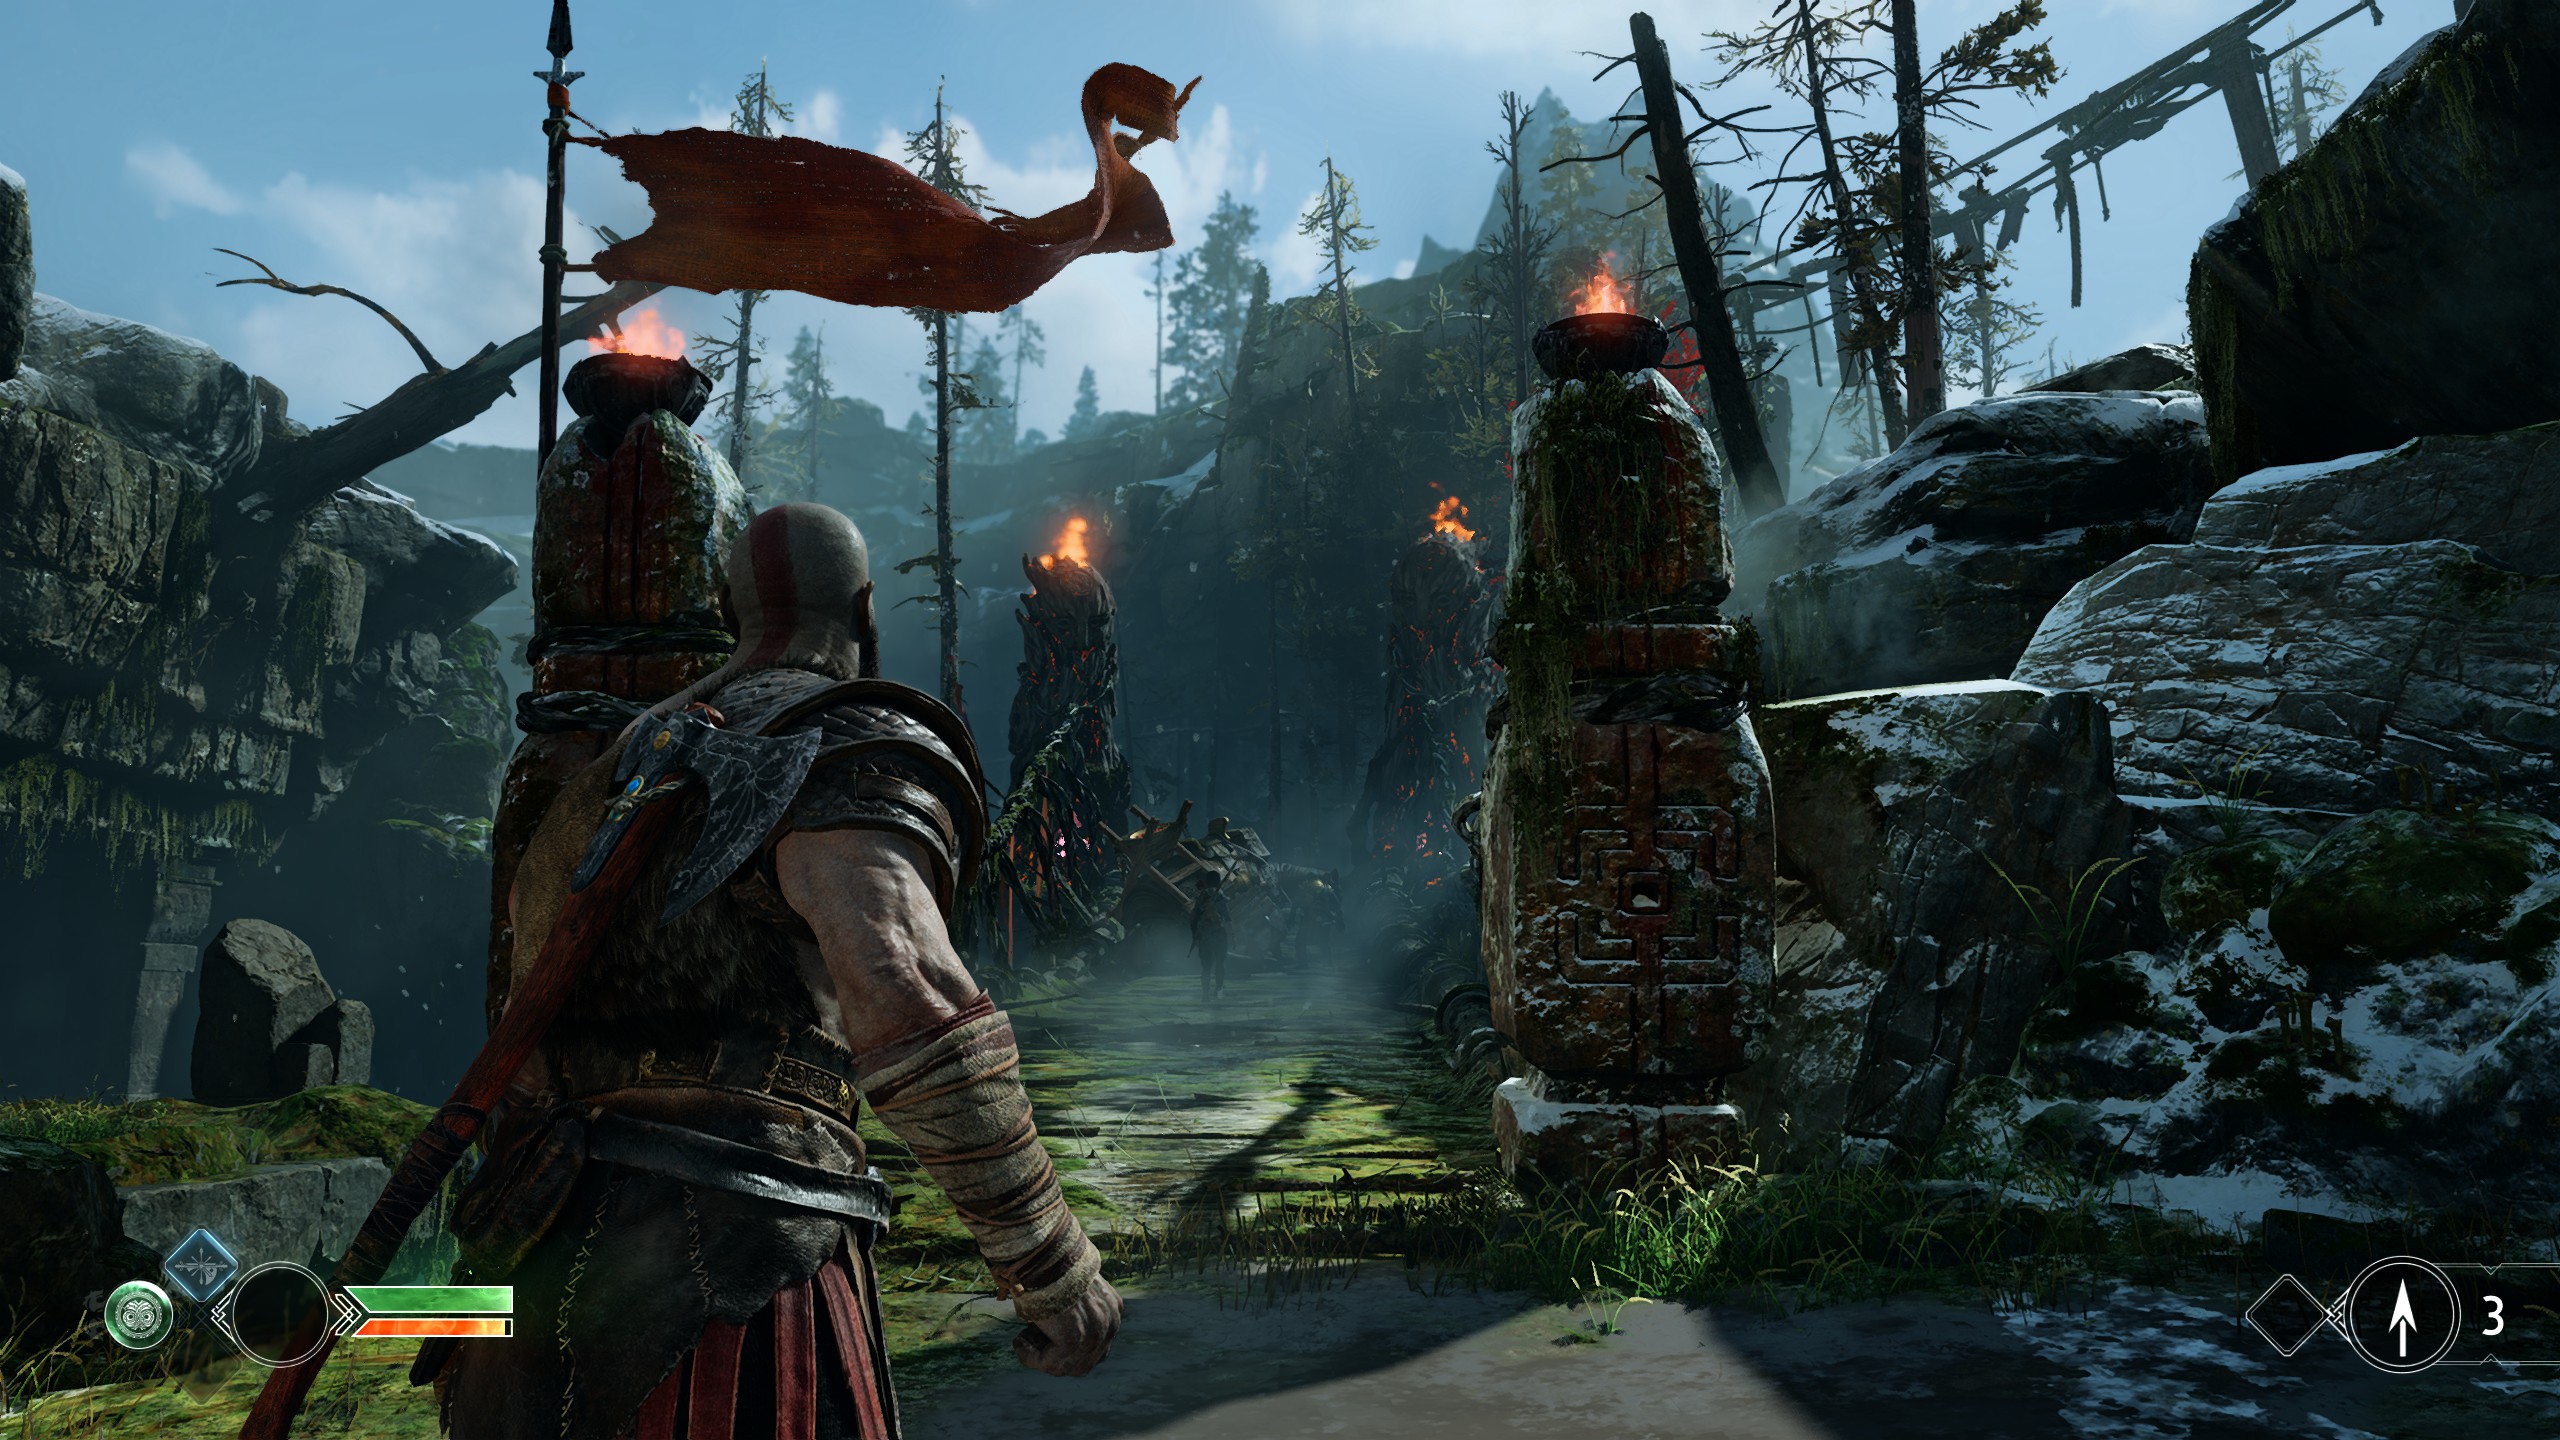 God of War PC impressions: this game deserves a second wind